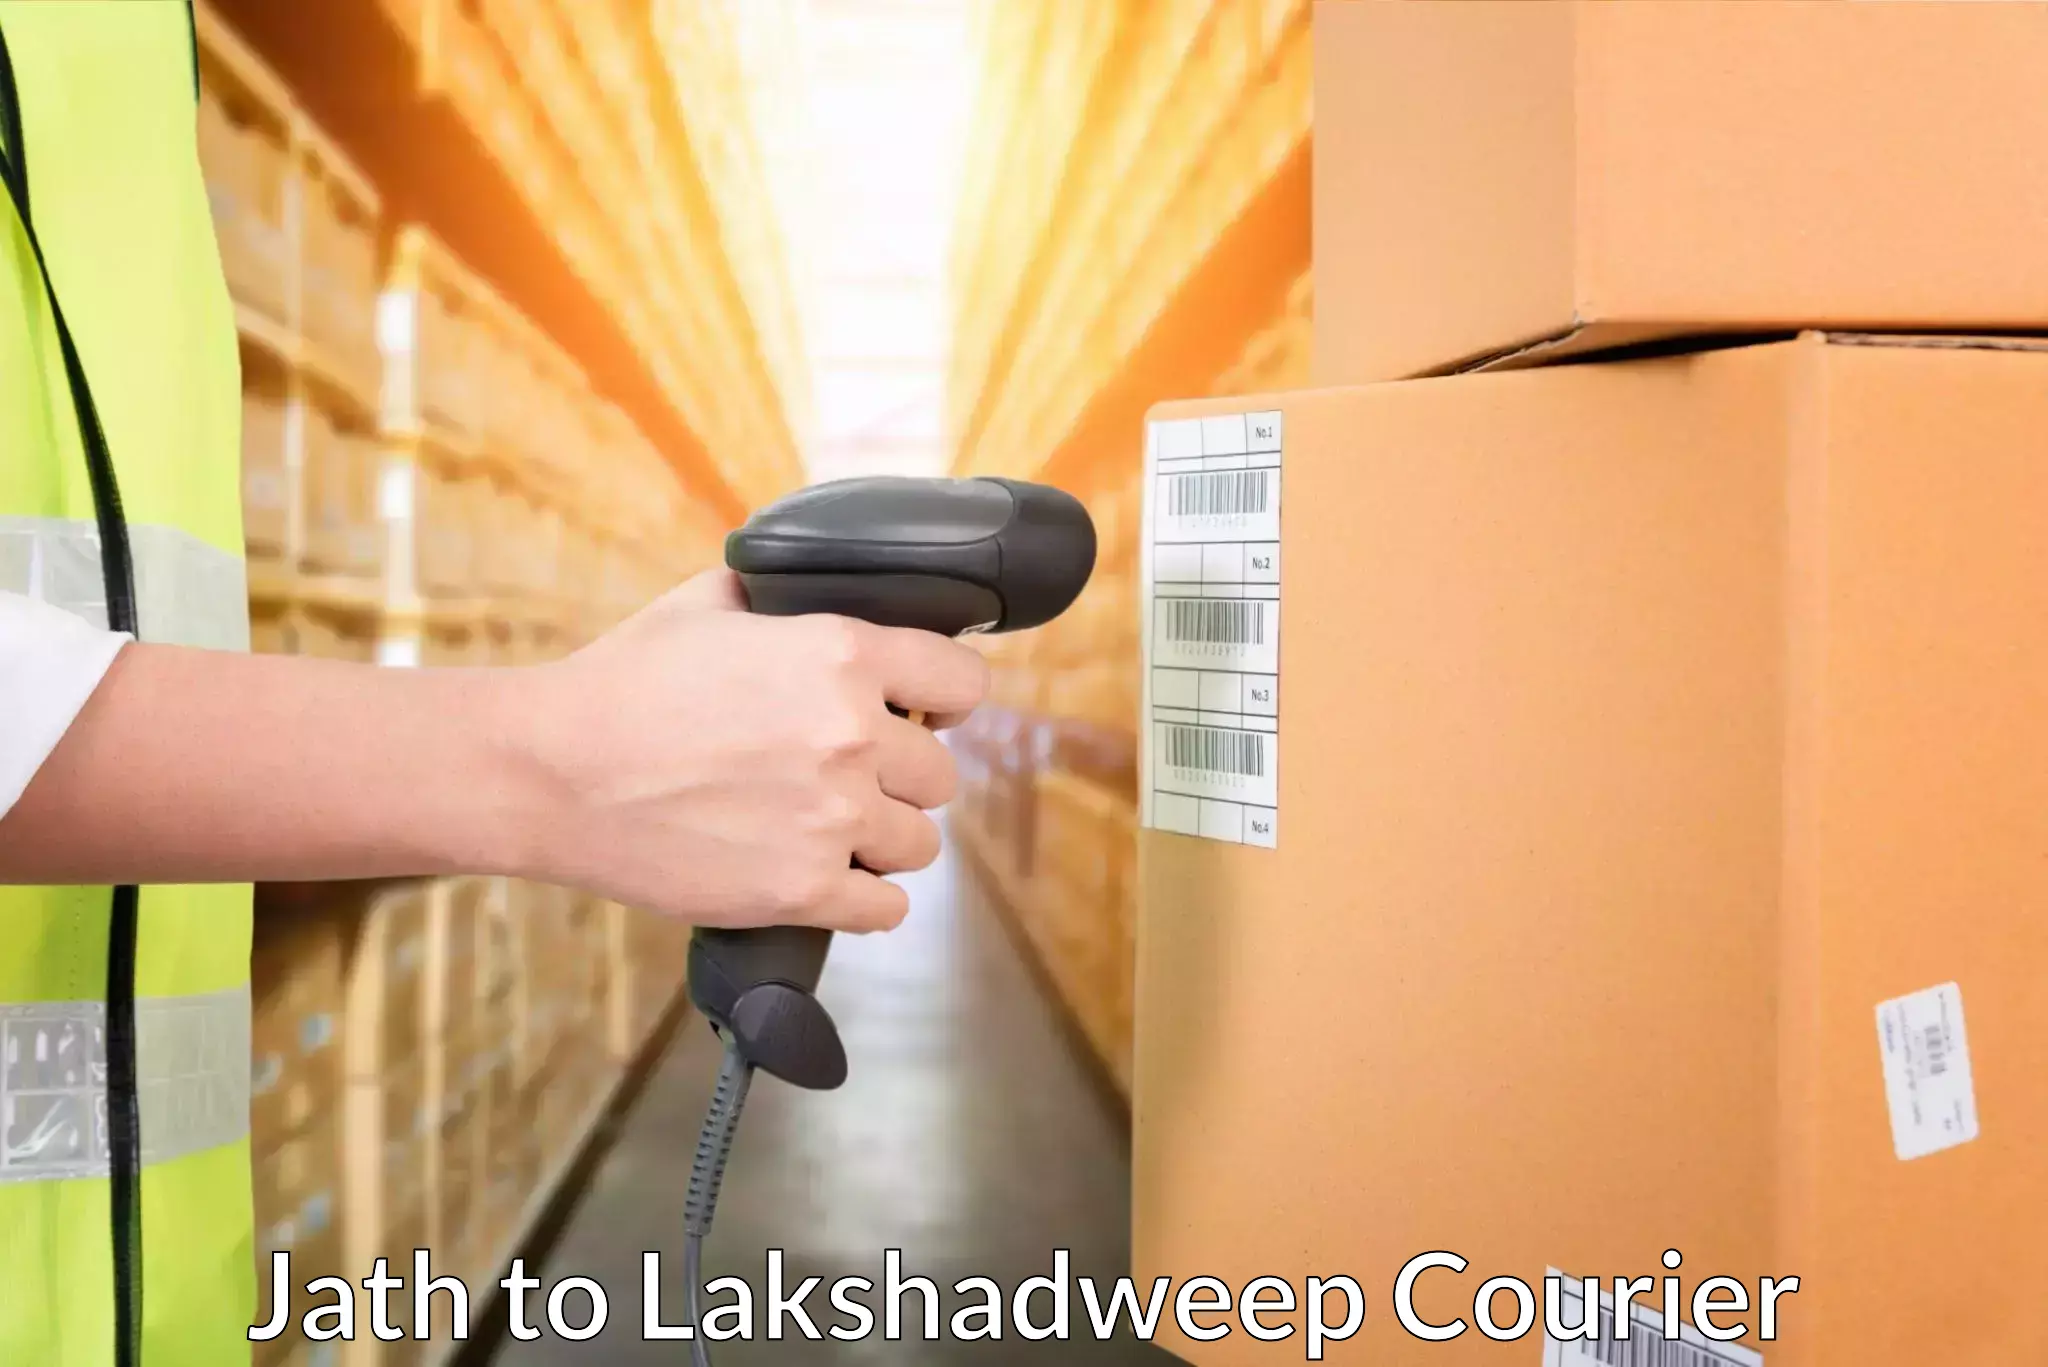 Speedy delivery service in Jath to Lakshadweep